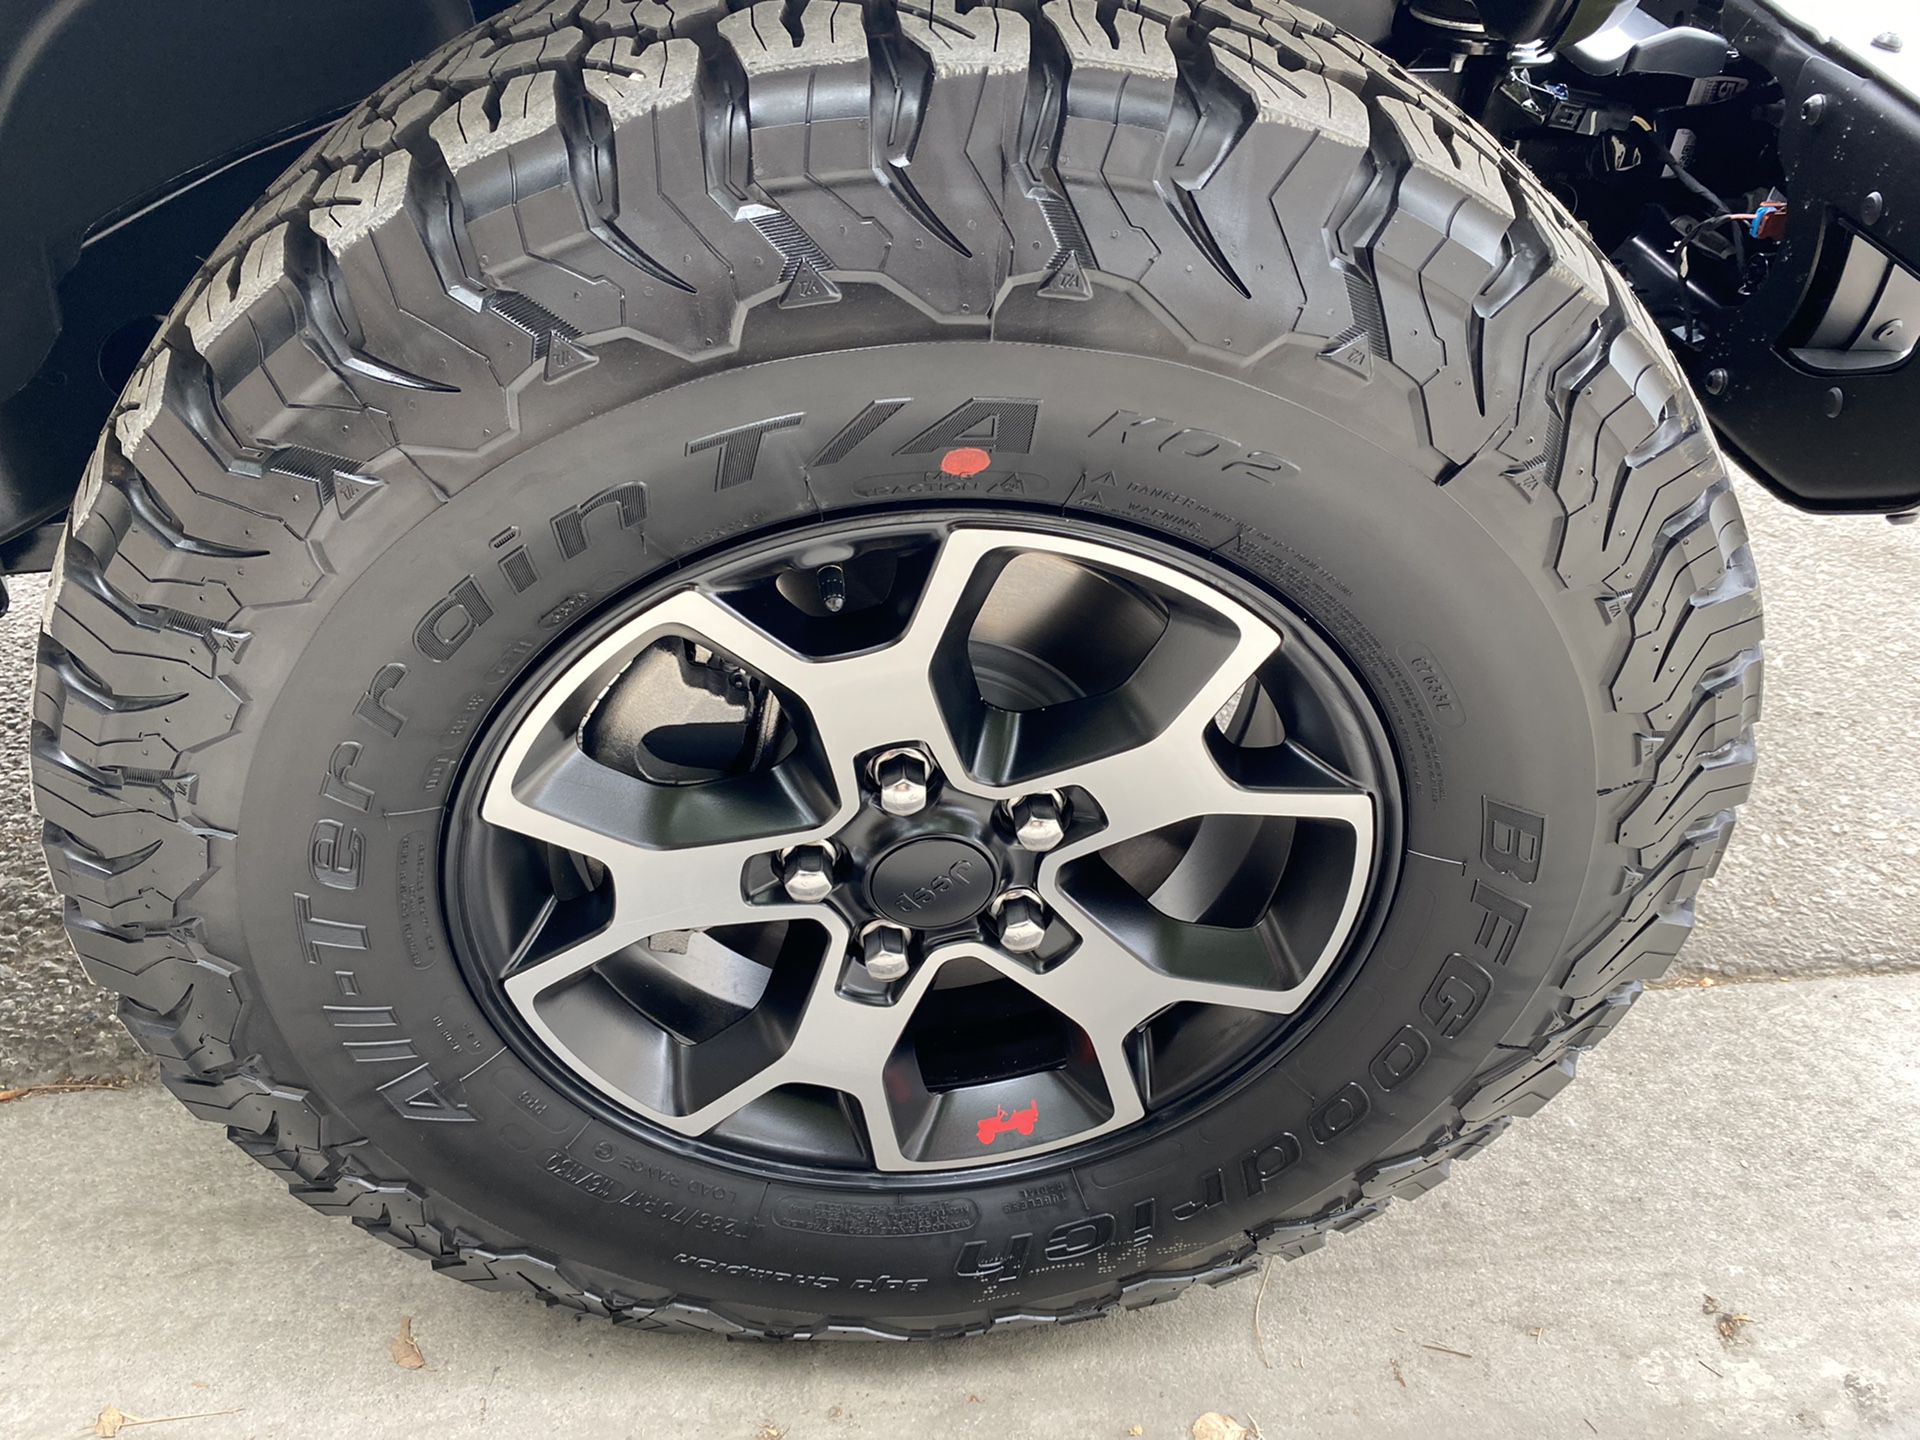 2021 Jeep rubicon wheels and tires (5)